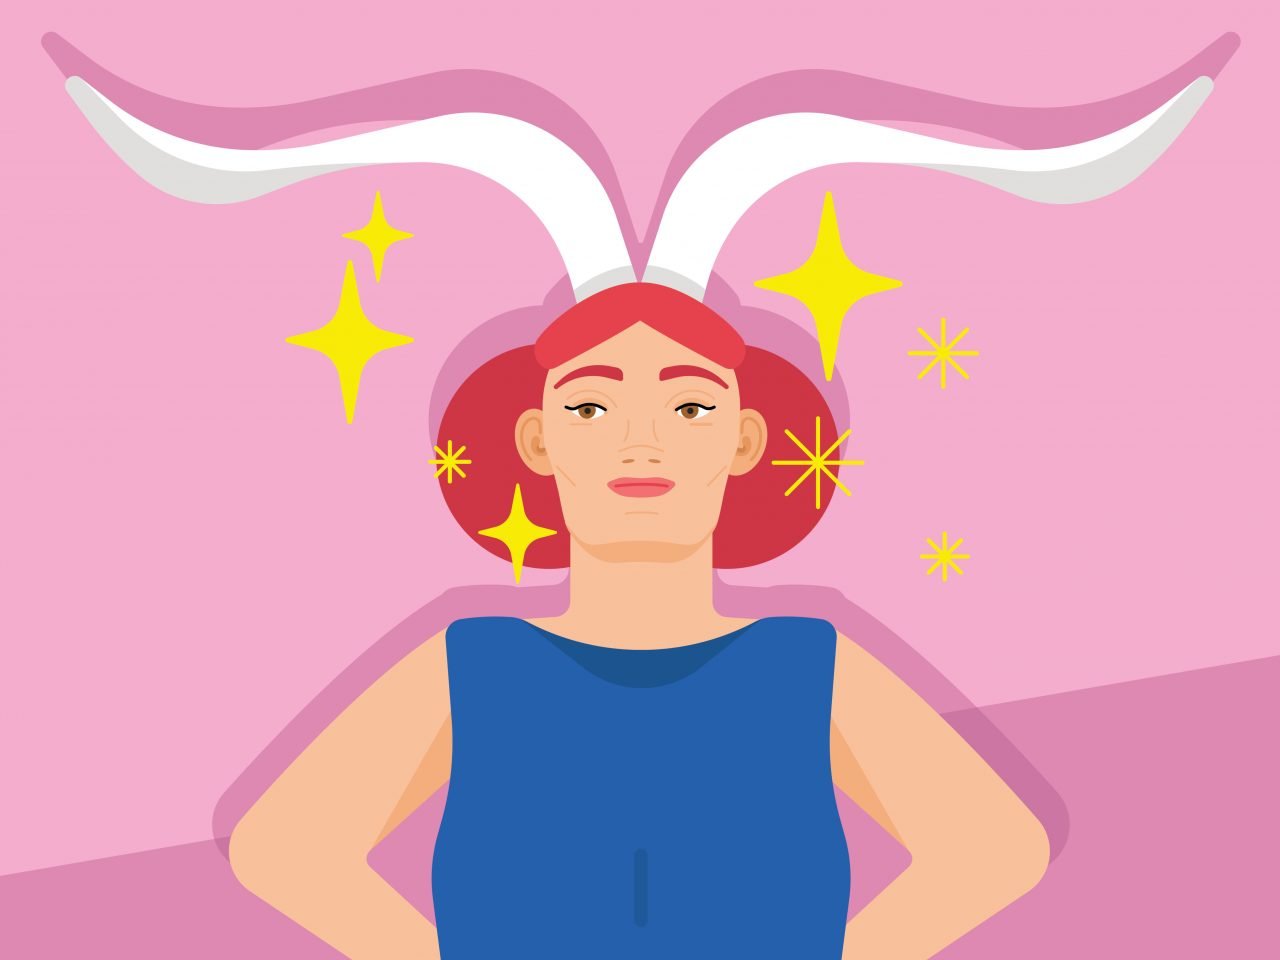 woman with antlers represents capricorn astrological symbol